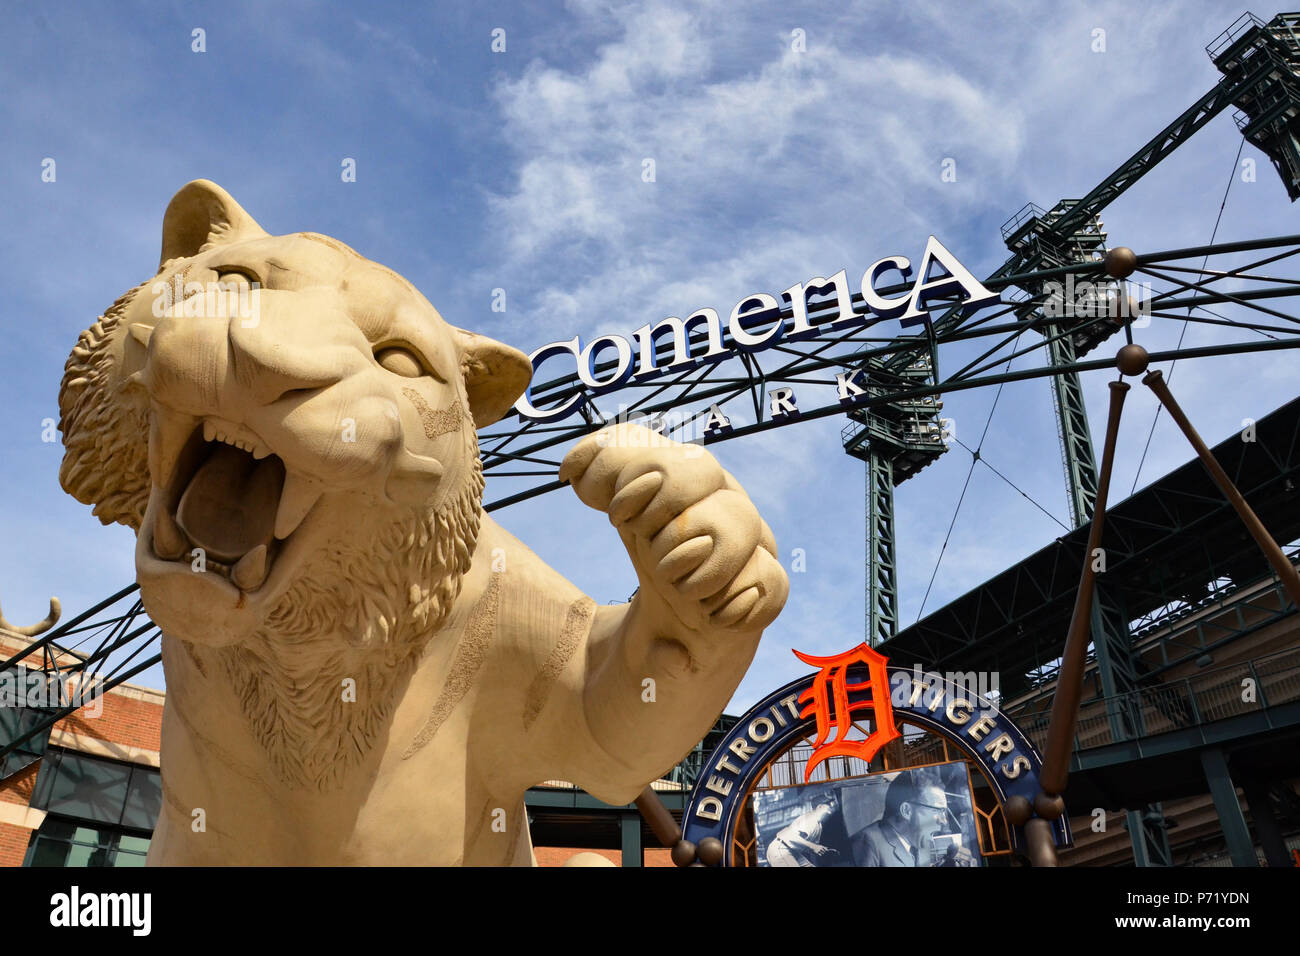 DETROIT, MI / USA - OCTOBER 21, 2017: The tiger at the main entrance of Comerica Park, home of the Detroit Tigers, greets visitors. Stock Photo